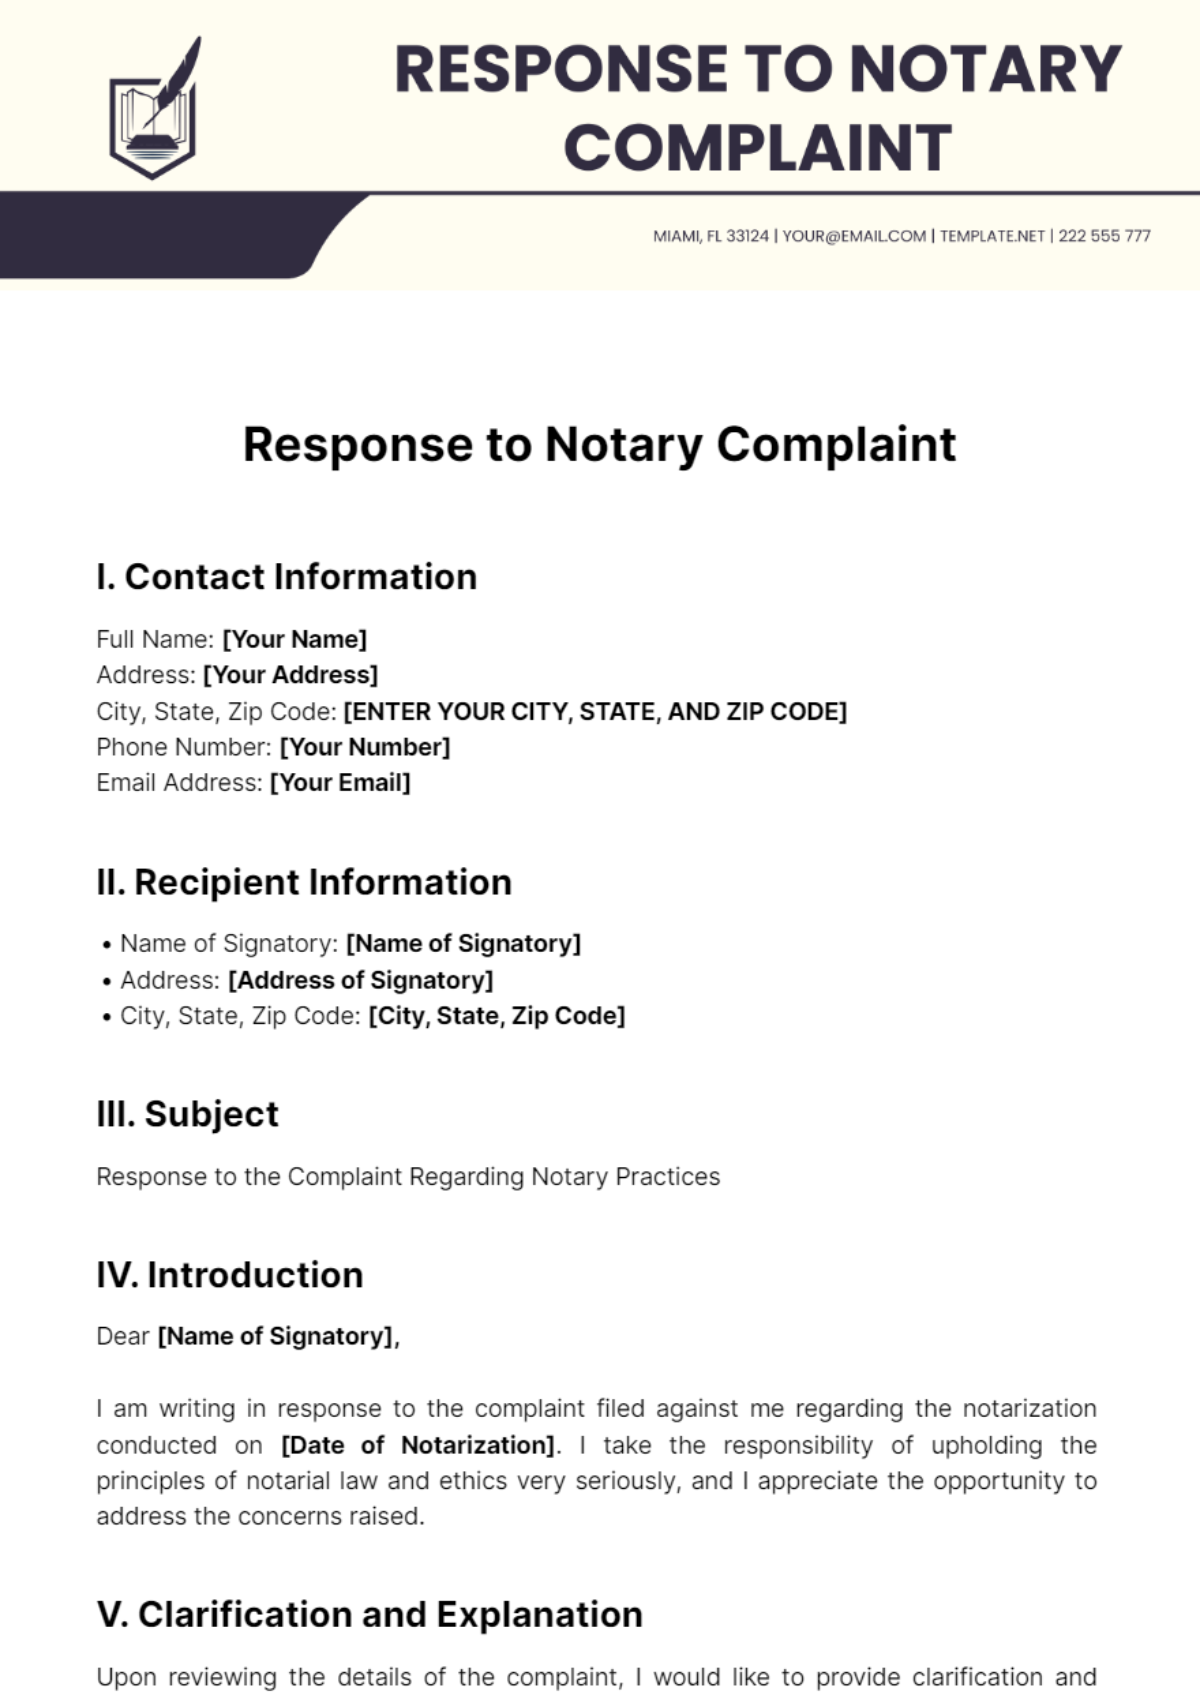 Response To Notary Complaint Template